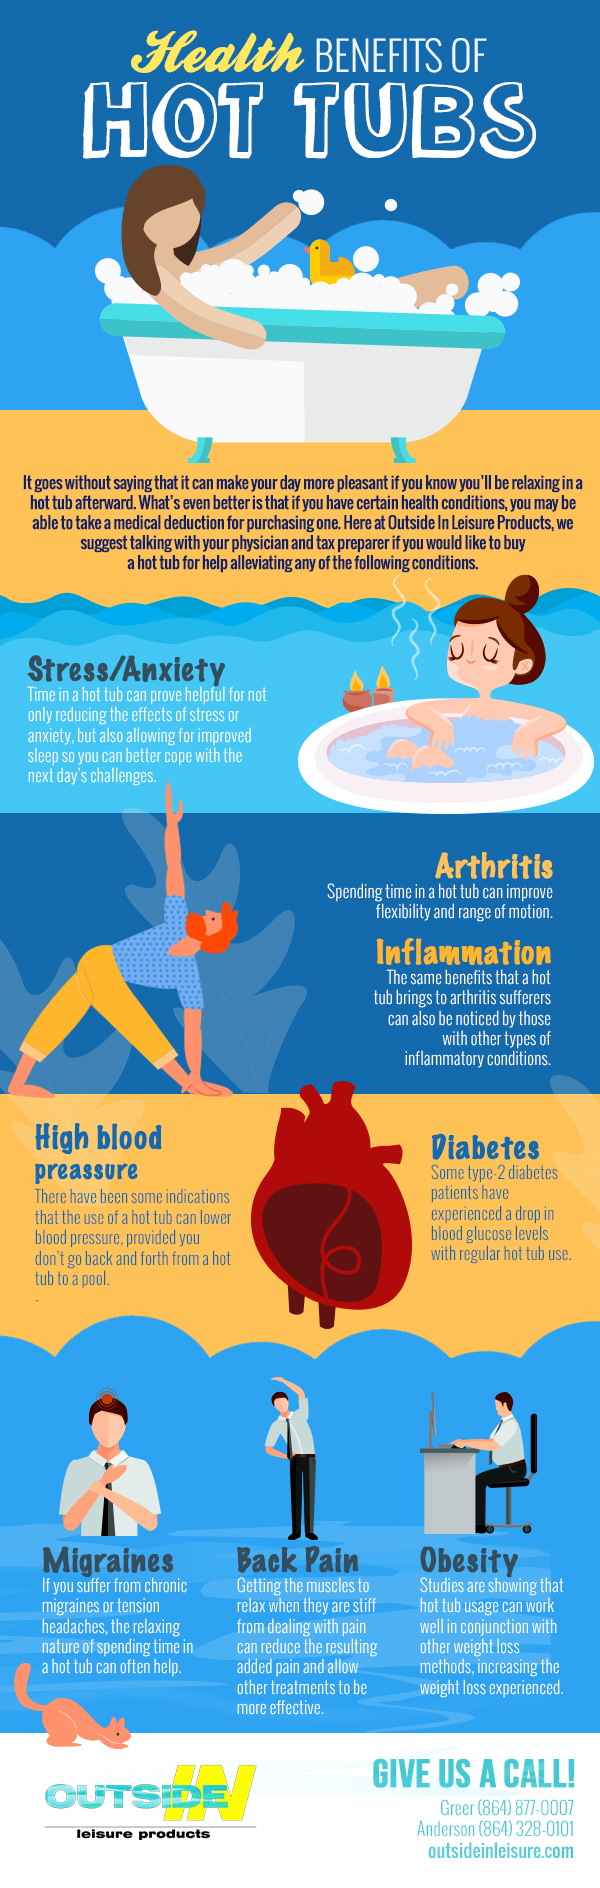 health-benefits-of-hot-tubs-infographic-outside-in-leisure